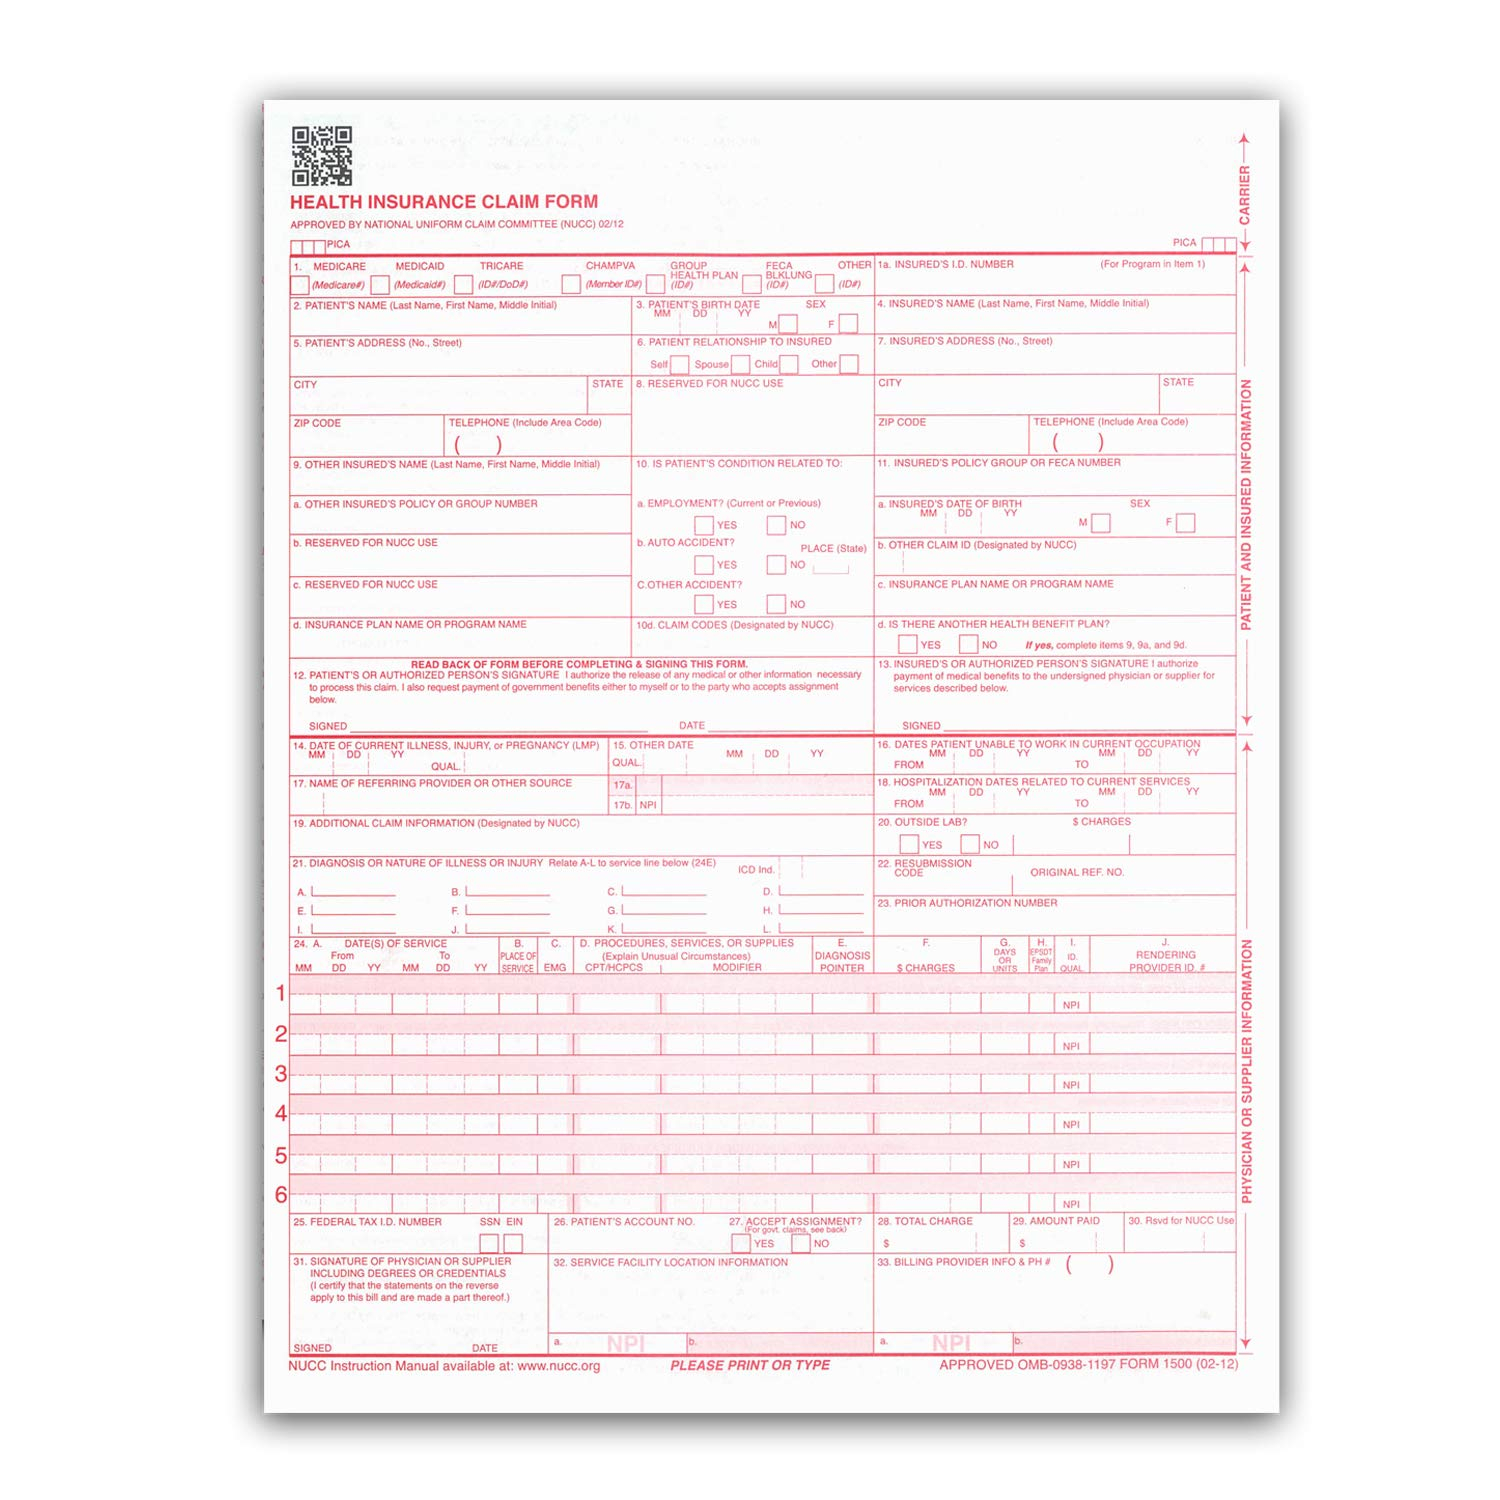 Buy New CMS 1500 Cl Forms HCFA Version 02 12 1000 Per Box Online At